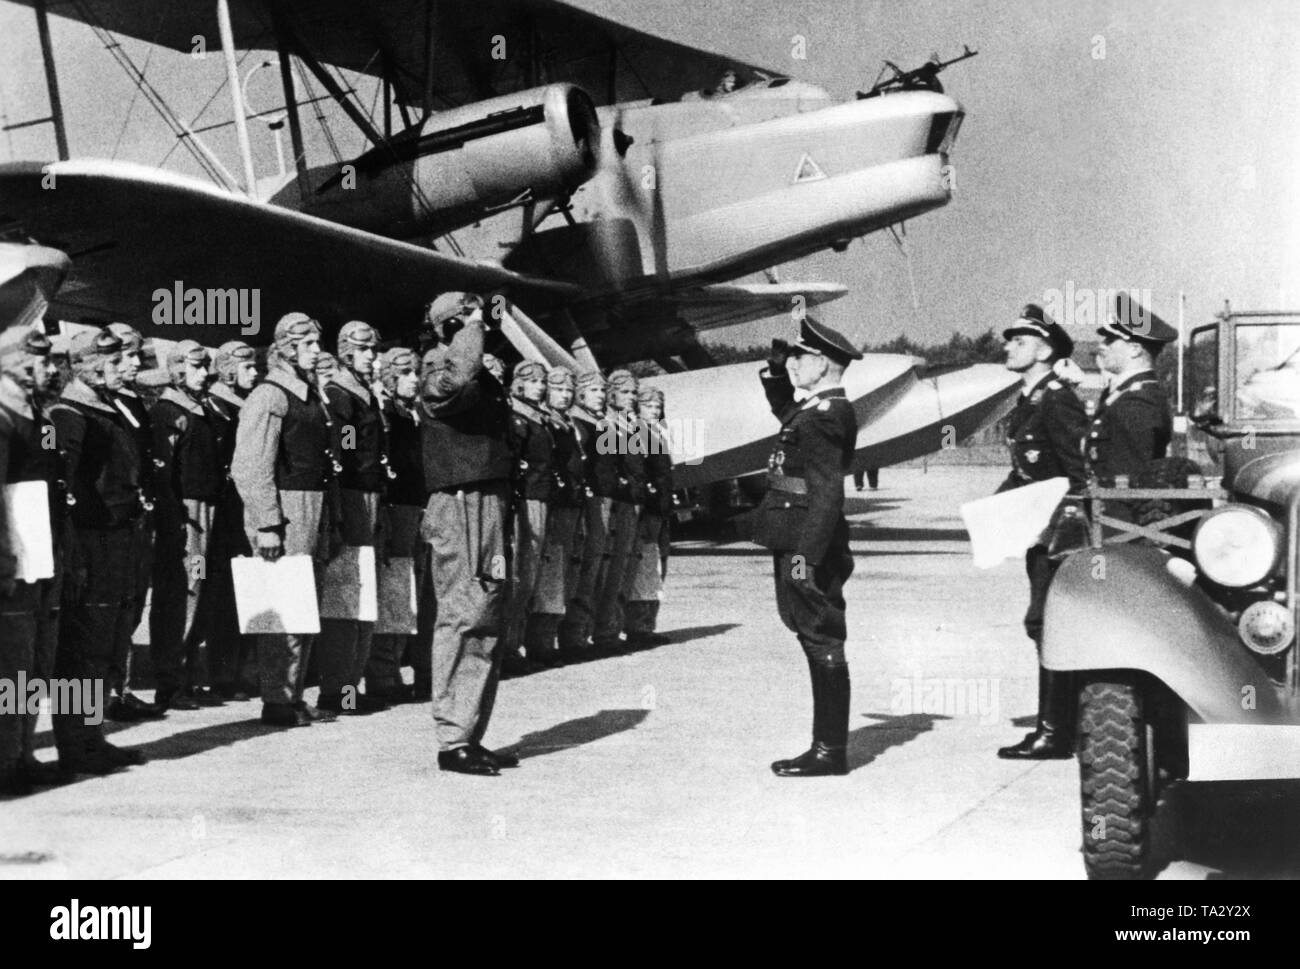 The squadron commander reports the lined up crew to the commander. It is a filmstill from the propaganda film 'Flieger zur See' from 1938/1939. Stock Photo